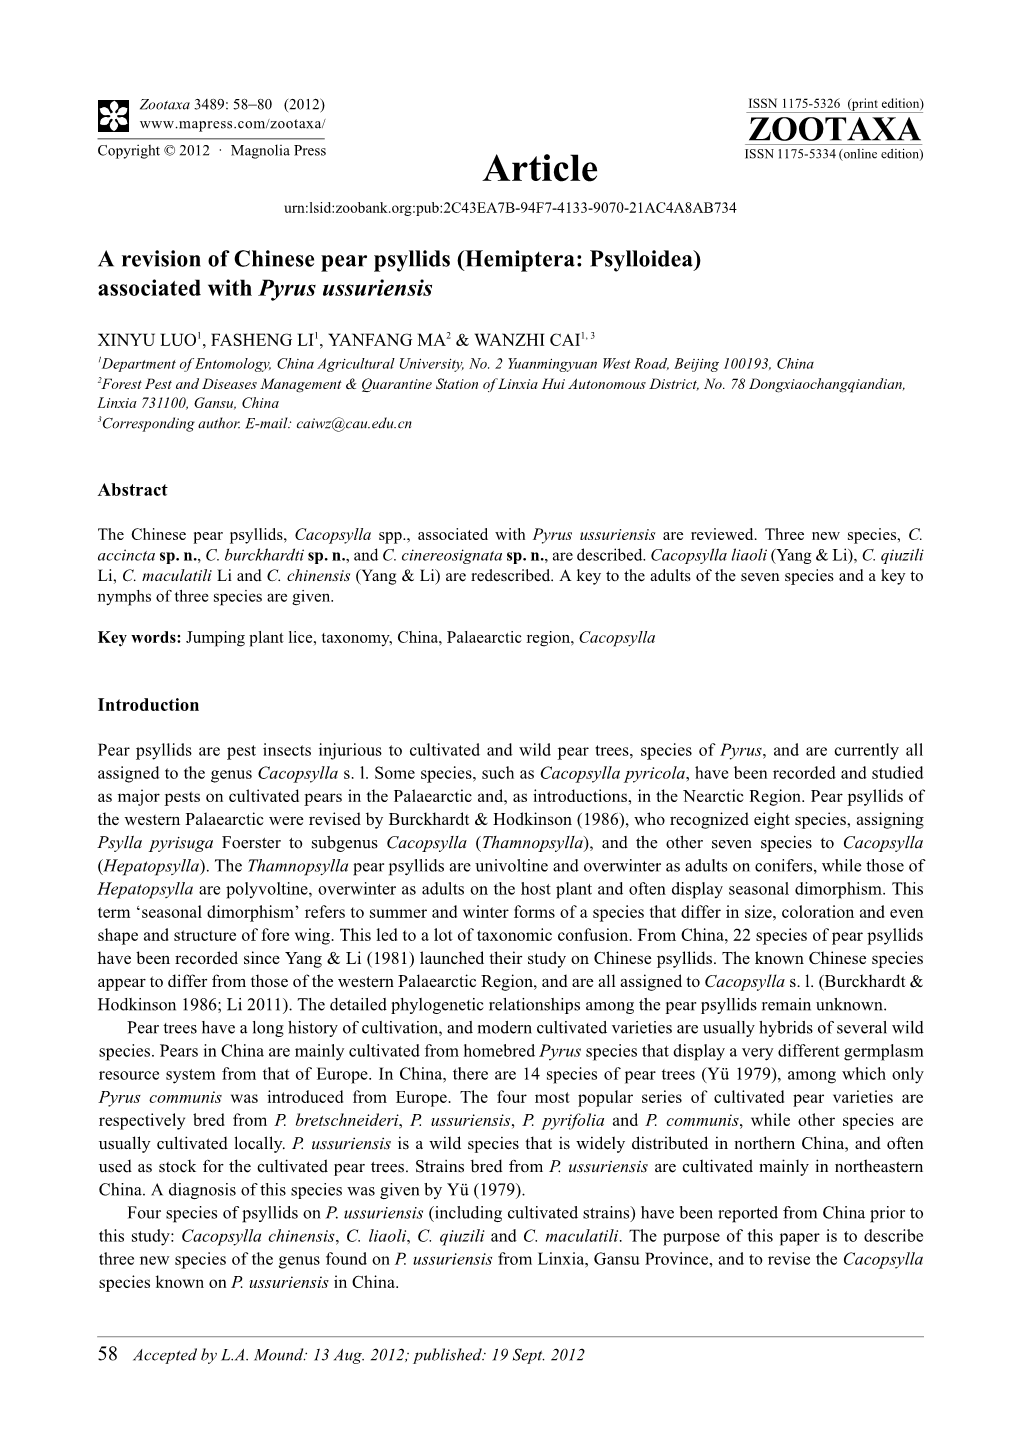 A Revision of Chinese Pear Psyllids (Hemiptera: Psylloidea) Associated with Pyrus Ussuriensis